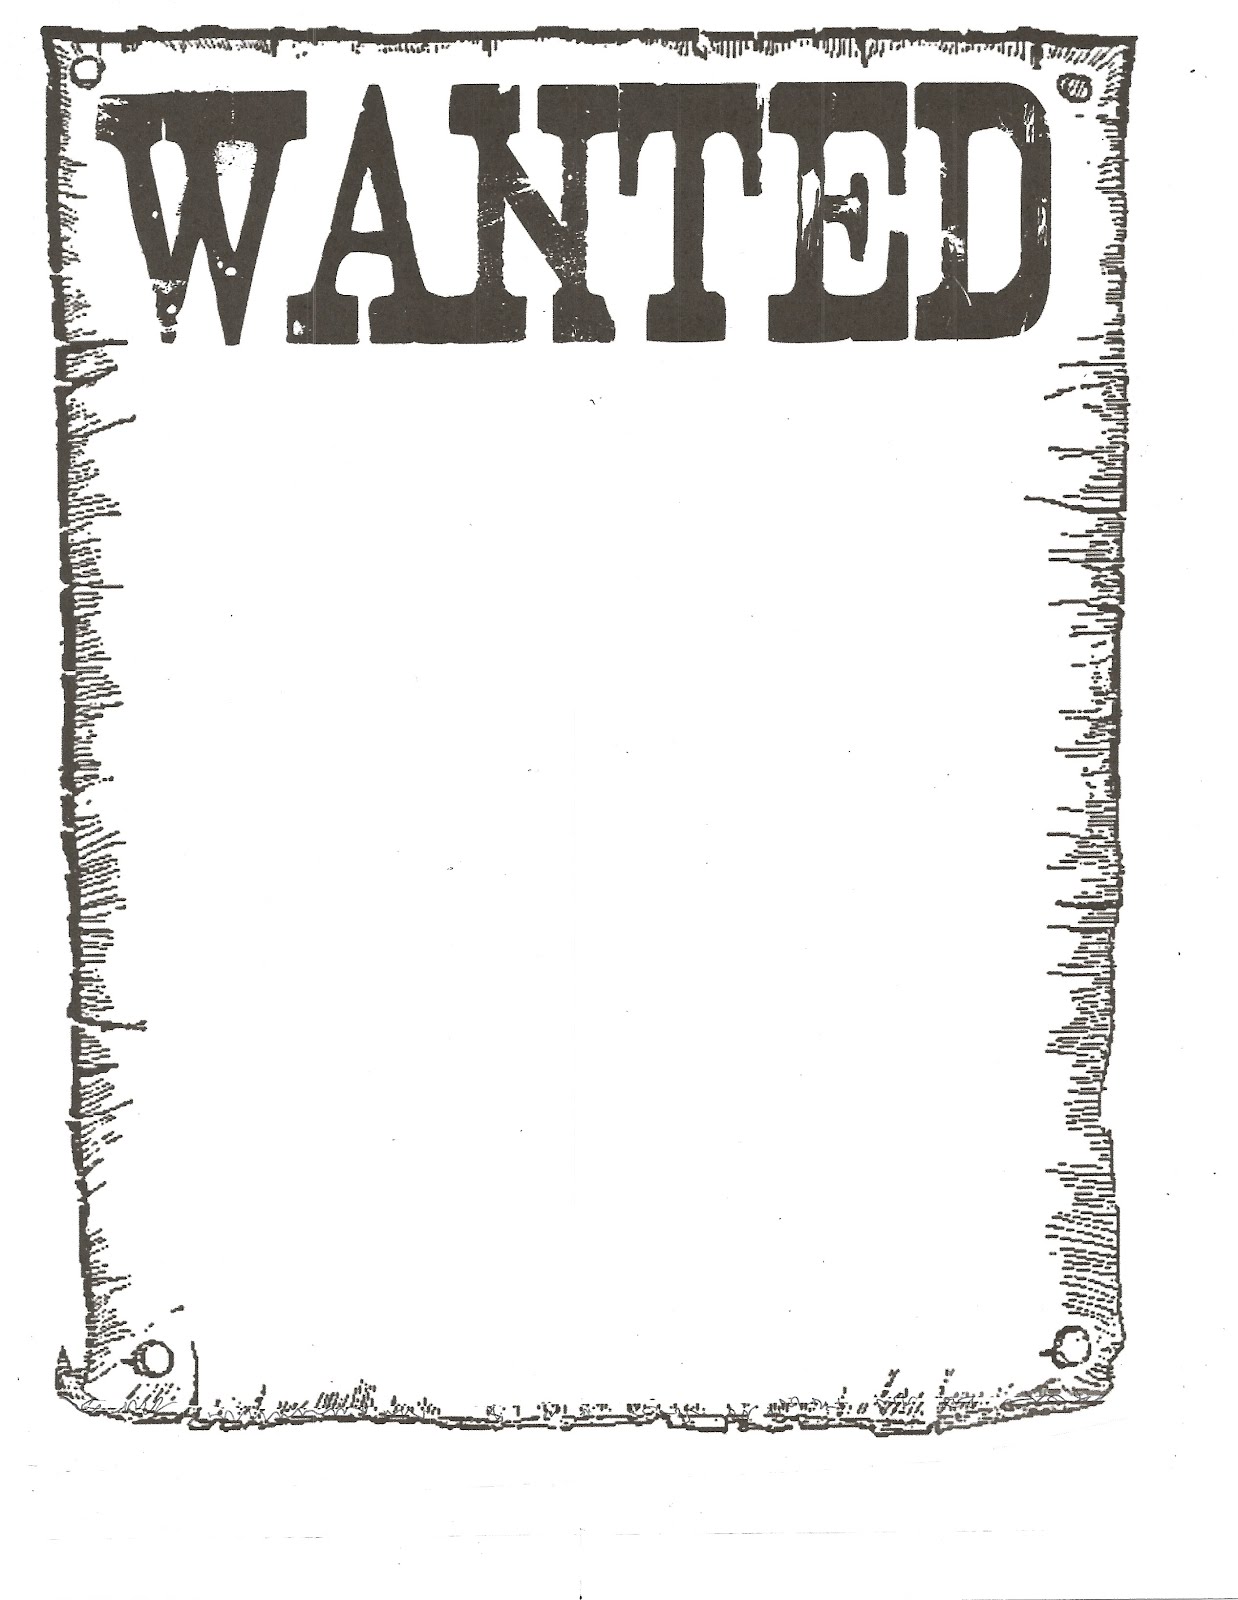 Classroom Freebies Wanted Poster GamesHD Clip Art Library